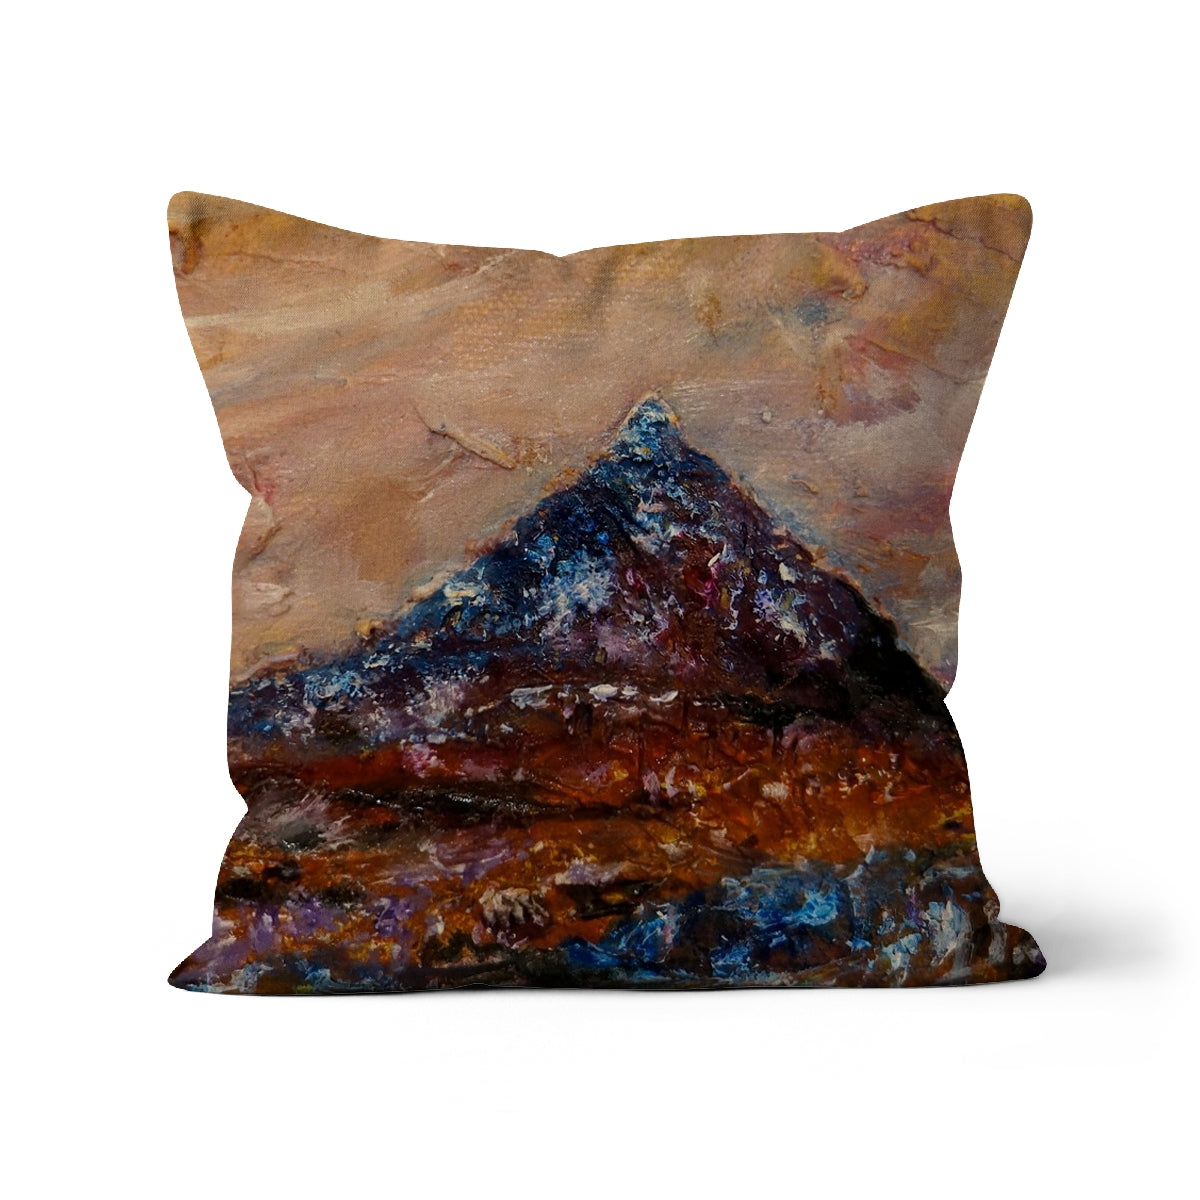 Buachaille Etive Mòr Art Gifts Cushion-Cushions-Glencoe Art Gallery-Canvas-22"x22"-Paintings, Prints, Homeware, Art Gifts From Scotland By Scottish Artist Kevin Hunter